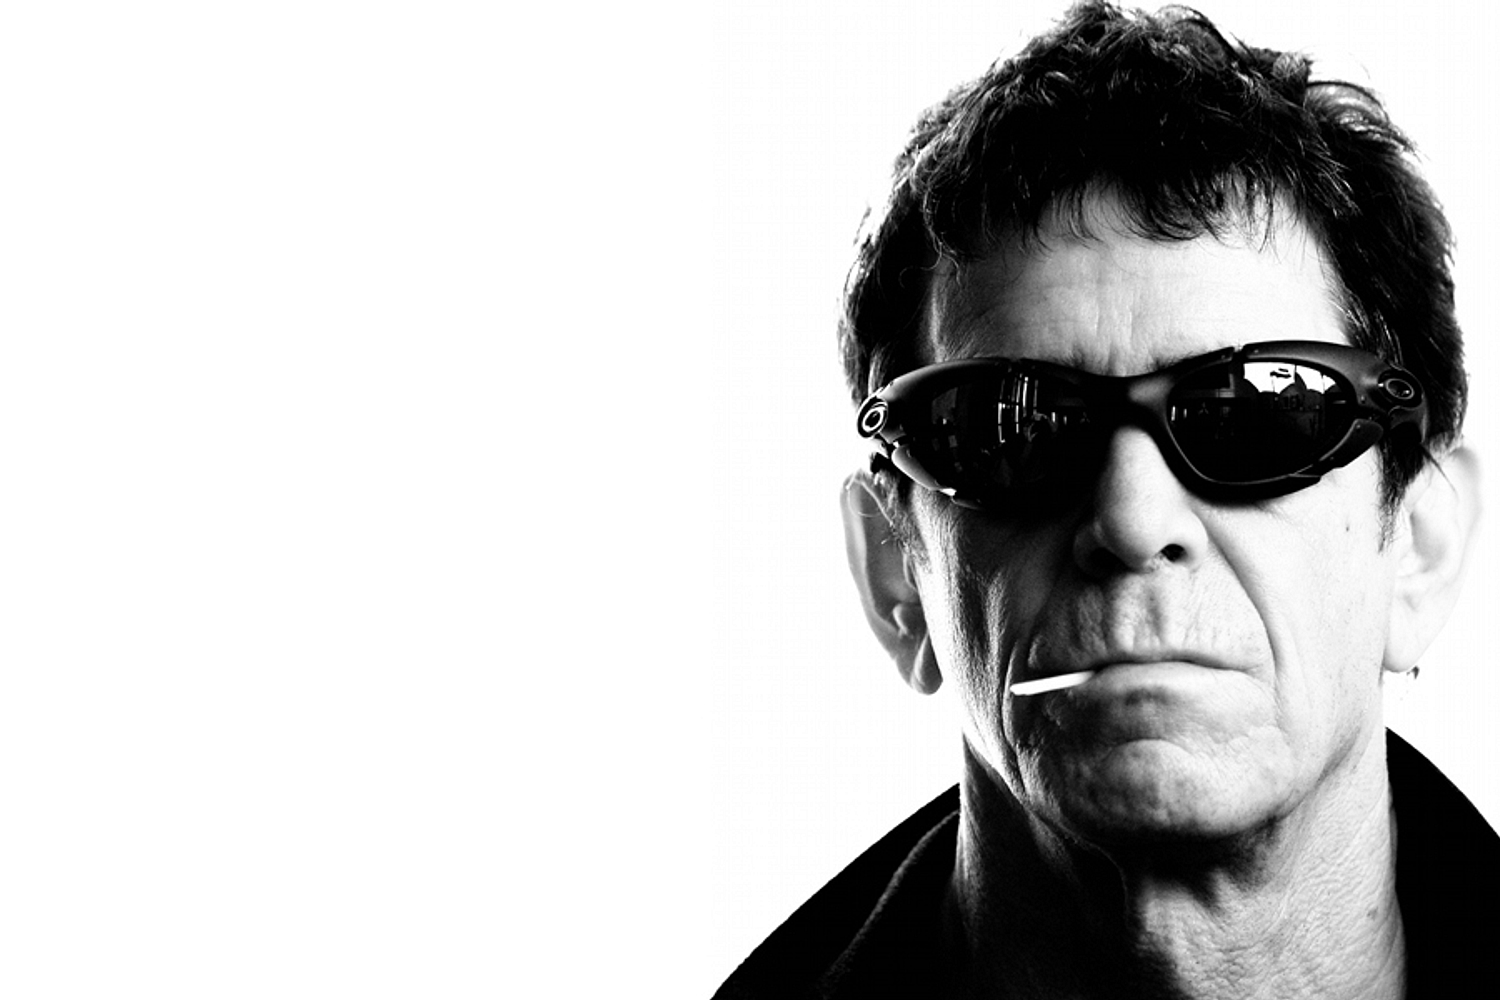 Laurie Anderson and Patti Smith induct Lou Reed into The Rock & Roll Hall Of Fame